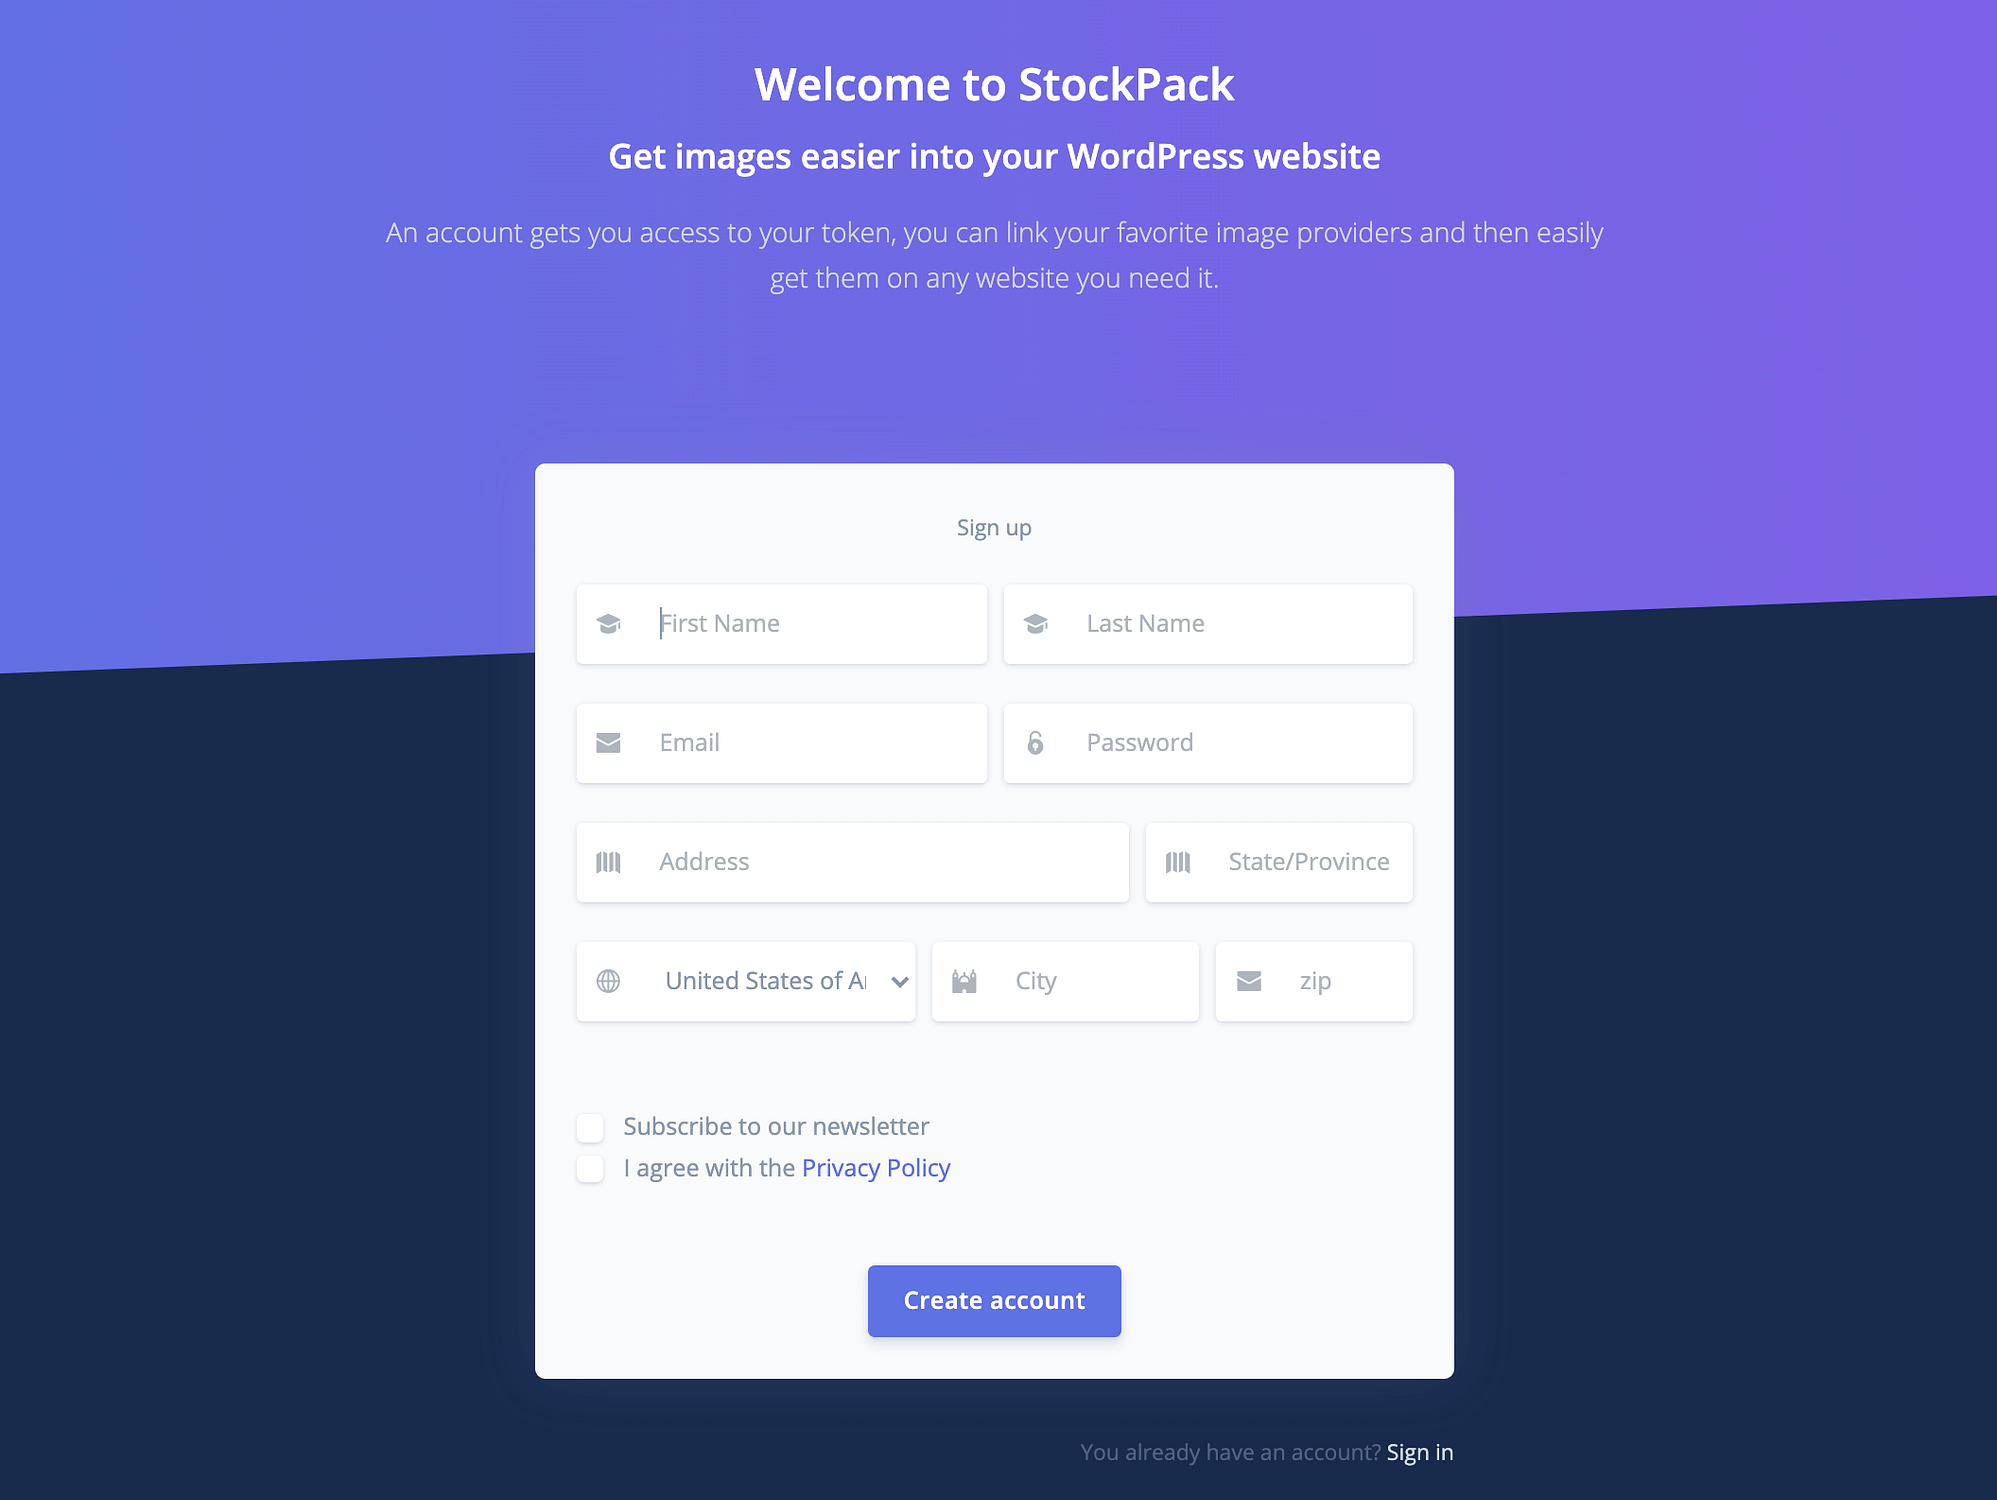 Creating a StockPack account.